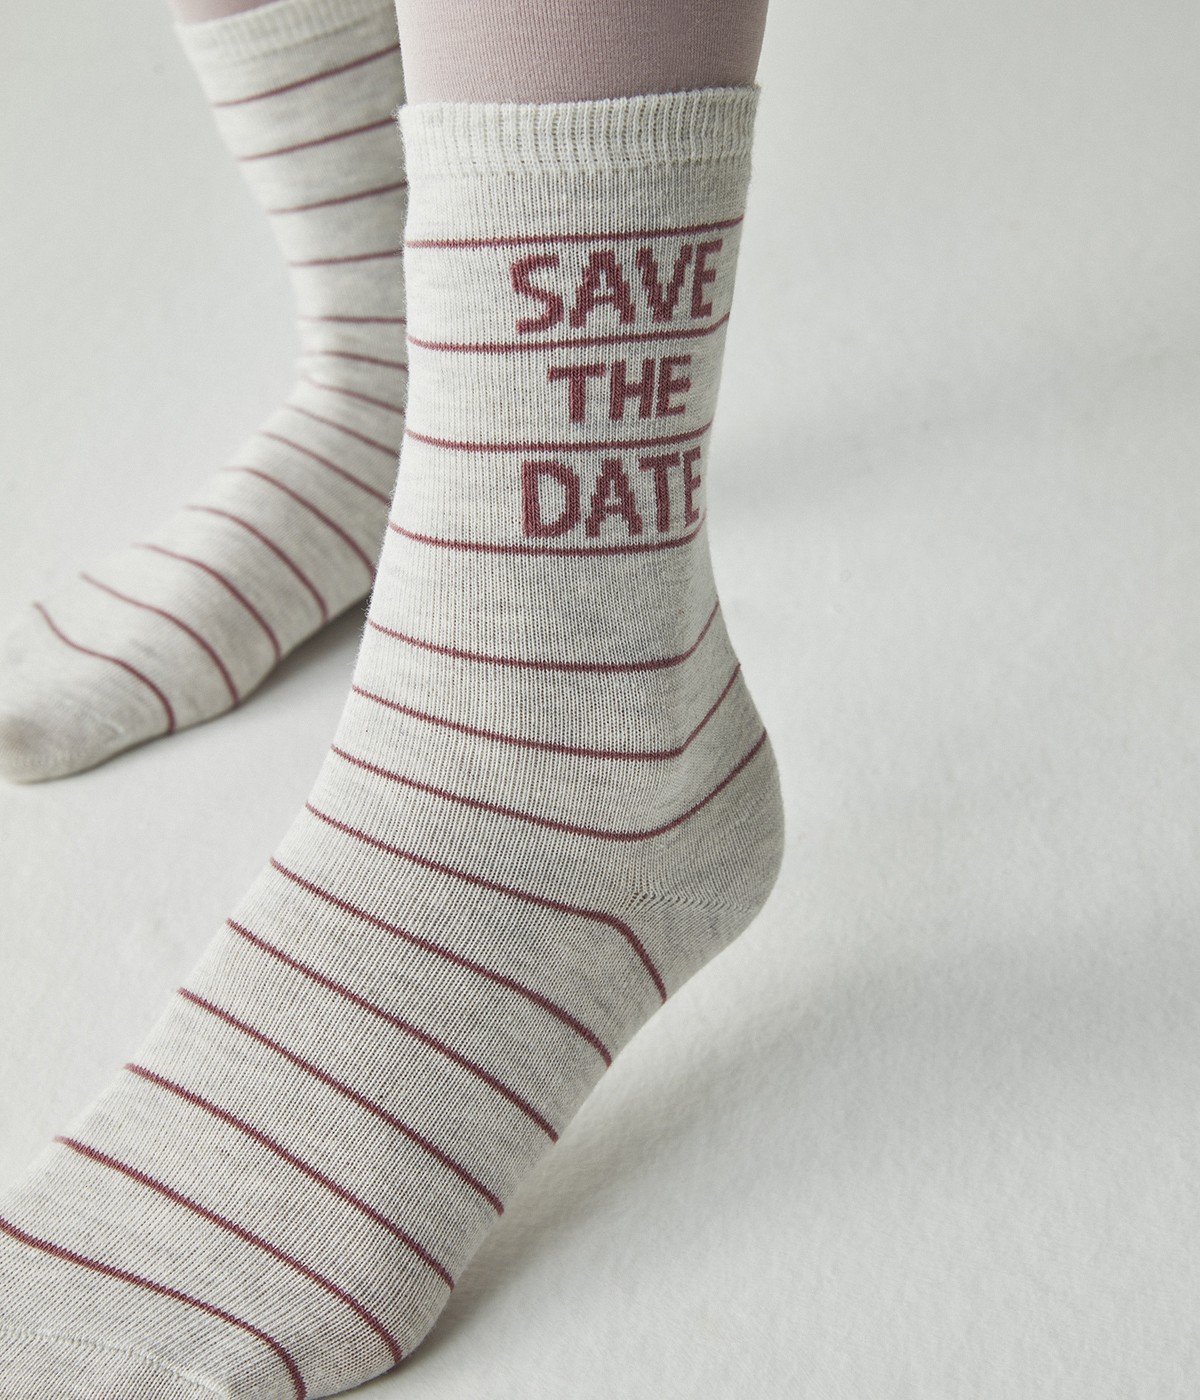 Save The Date 3in1 Socks